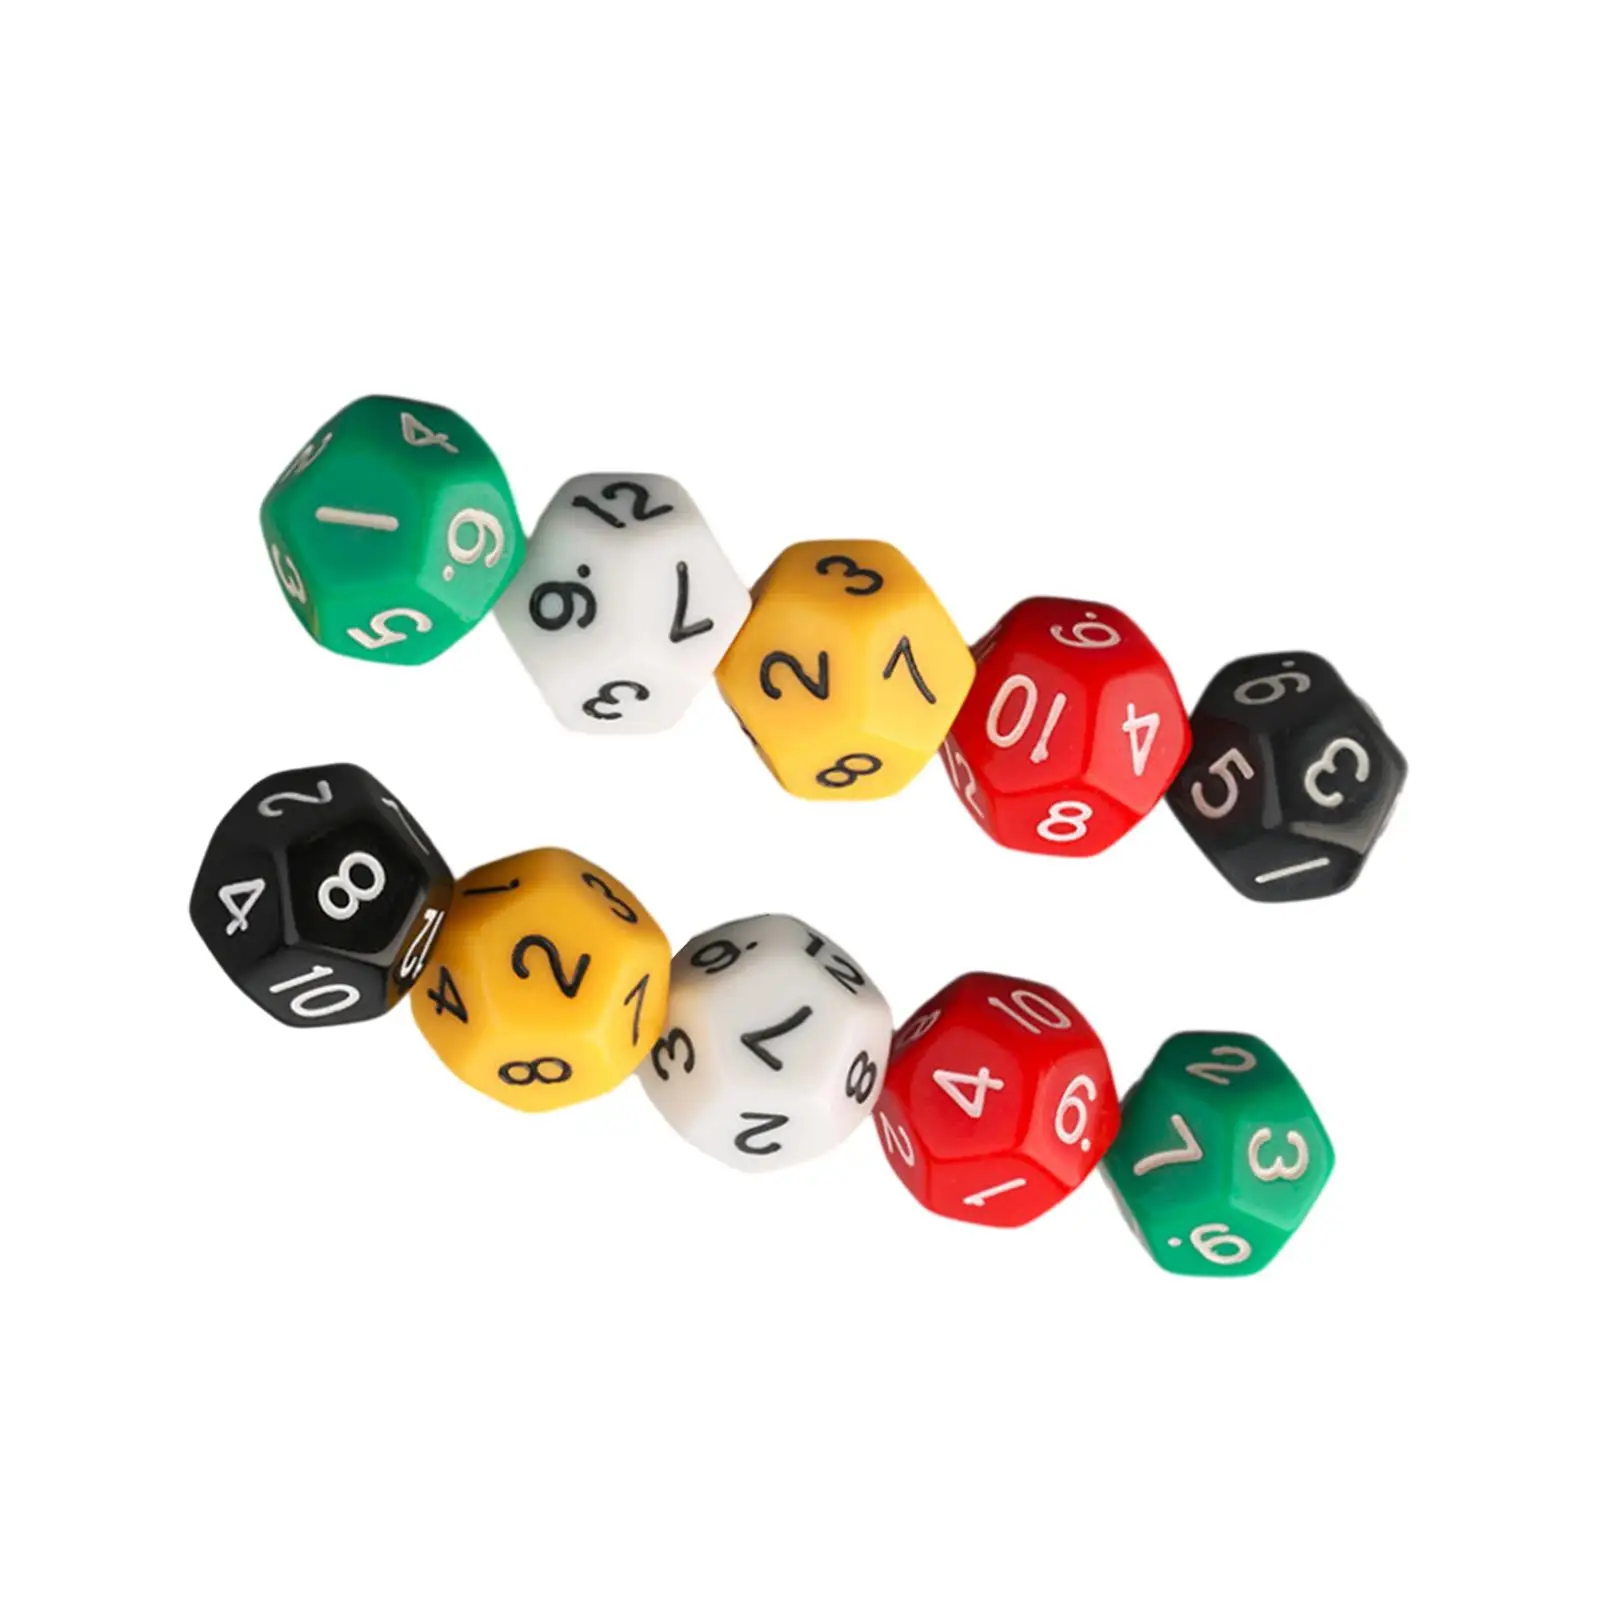 10Pcs 12 Sided Dice Role Playing Game Dices Party Favors Multipurpose Table Games 20mm for Party Game Board Game Card Game